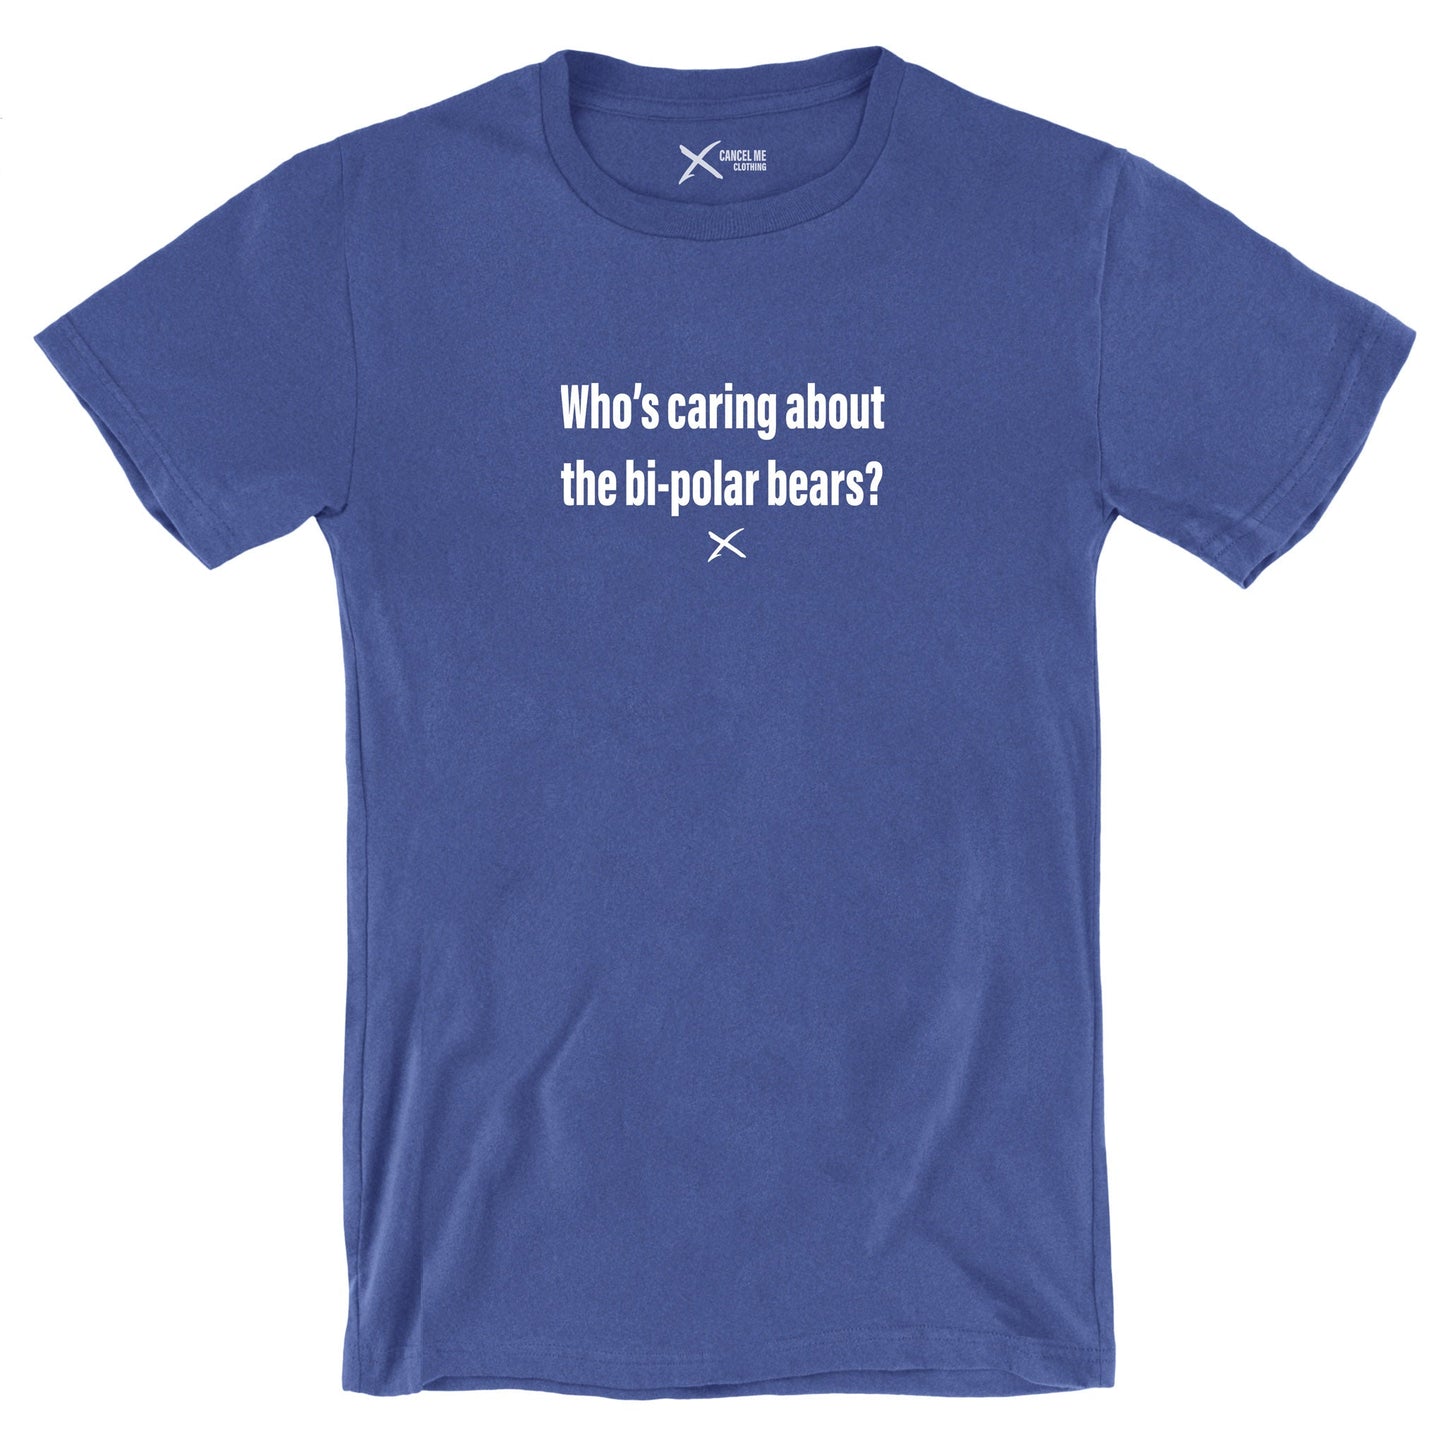 Who's caring about the bi-polar bears? - Shirt